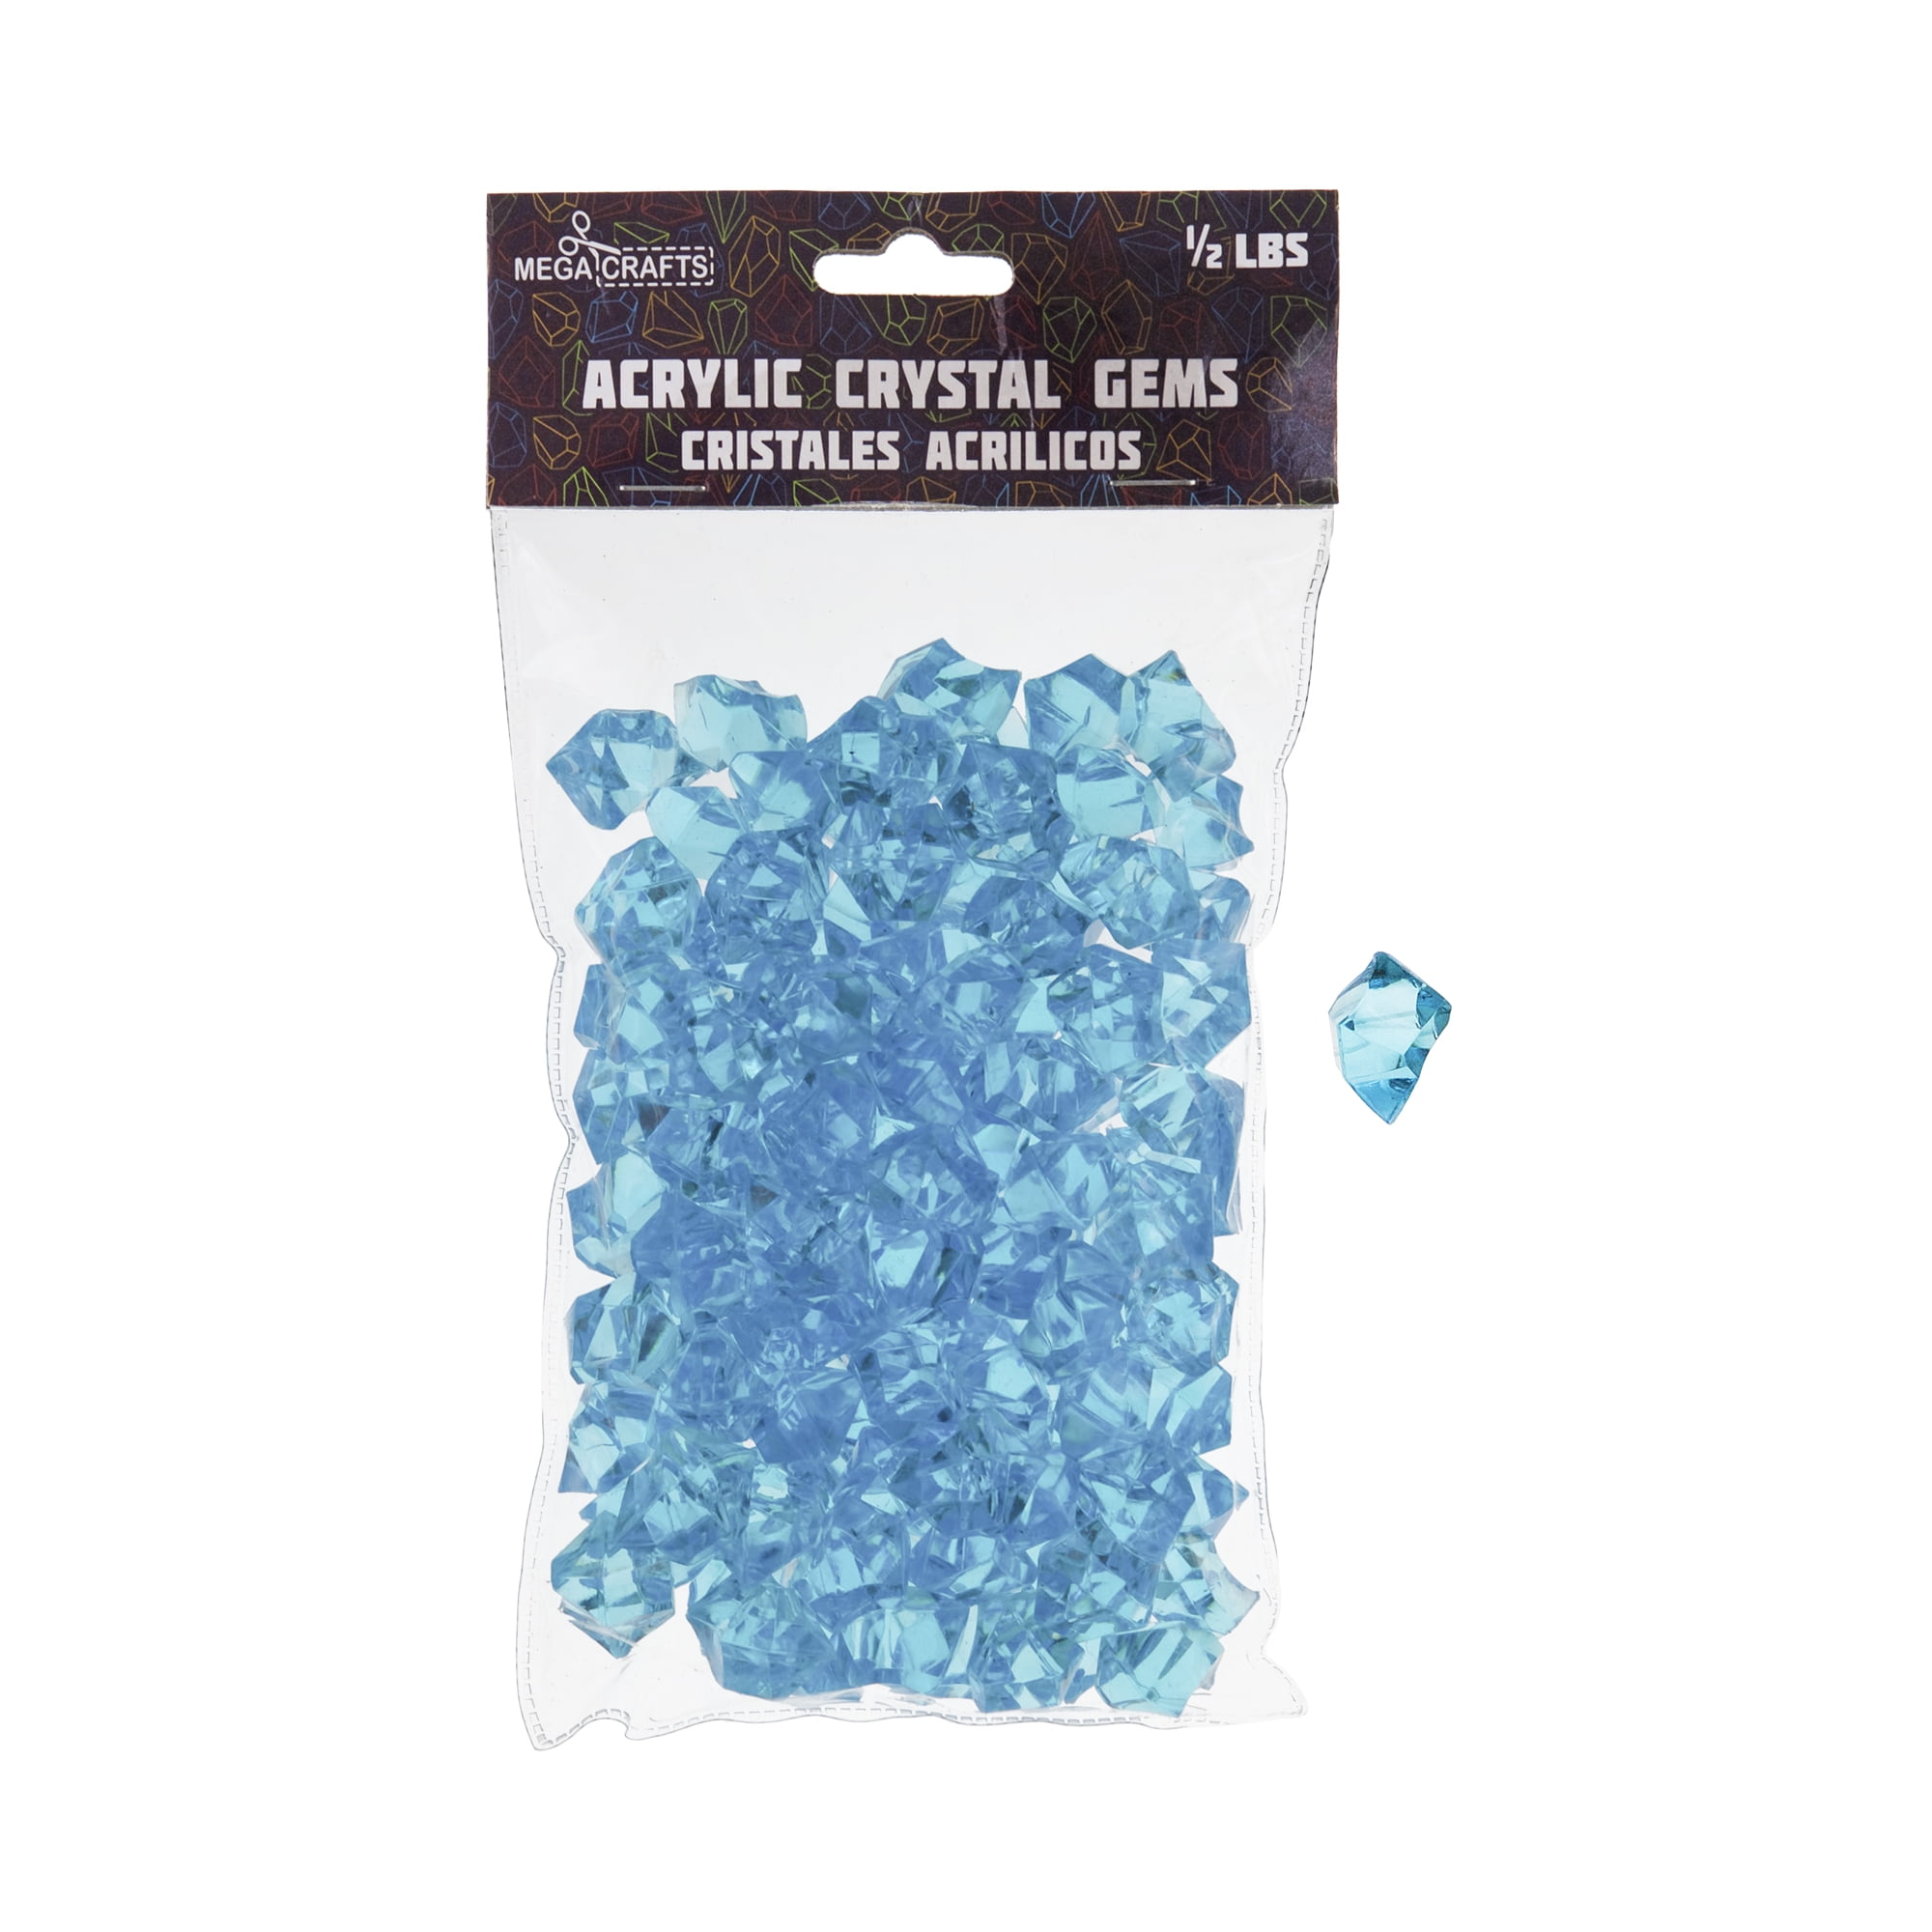 Rocks-Acrylic Clear Colored Ice Rock Cubes 300g/bag Demoon Vase Filler or Table Decorating Idea turquoise